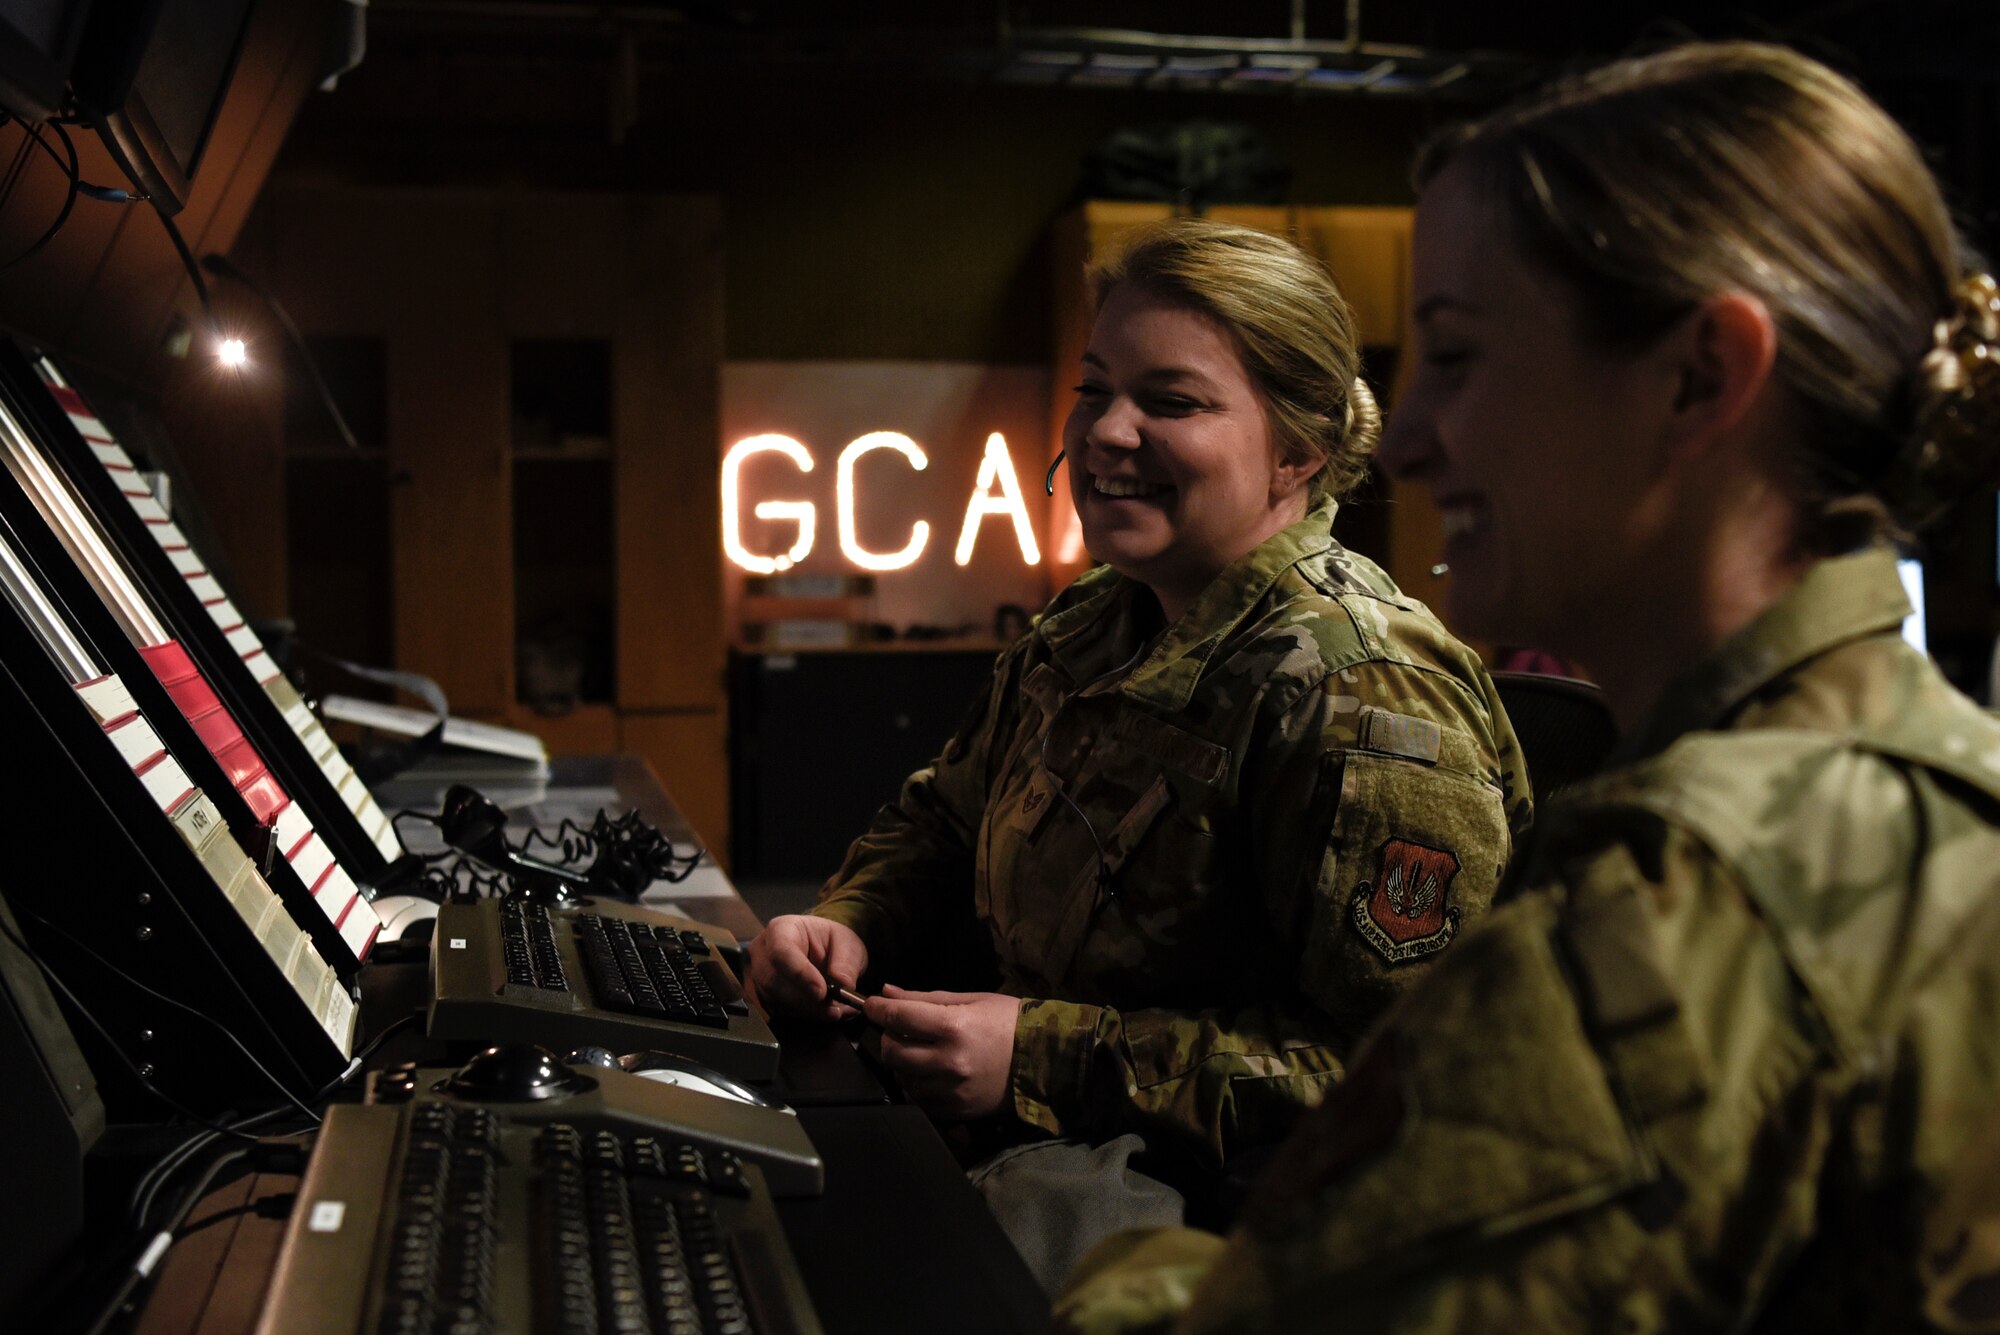 U.S. Air Force Staff Sgts. Kelly Laws, left, and Ashley Aring, right, both 52nd Operations Support Squadron Air Traffic Control watch supervisors, operate Ground Controlled Approach radar equipment at Spangdahlem Air Base, Germany, March 25, 2020. Airmen in the GCA radar facility control aircraft within about 30 miles of the airfield. GCA Airmen also communicate with pilots from NATO countries to make sure the airspace remains safe for all. (U.S. Air Force photo by Senior Airman Valerie R. Seelye)